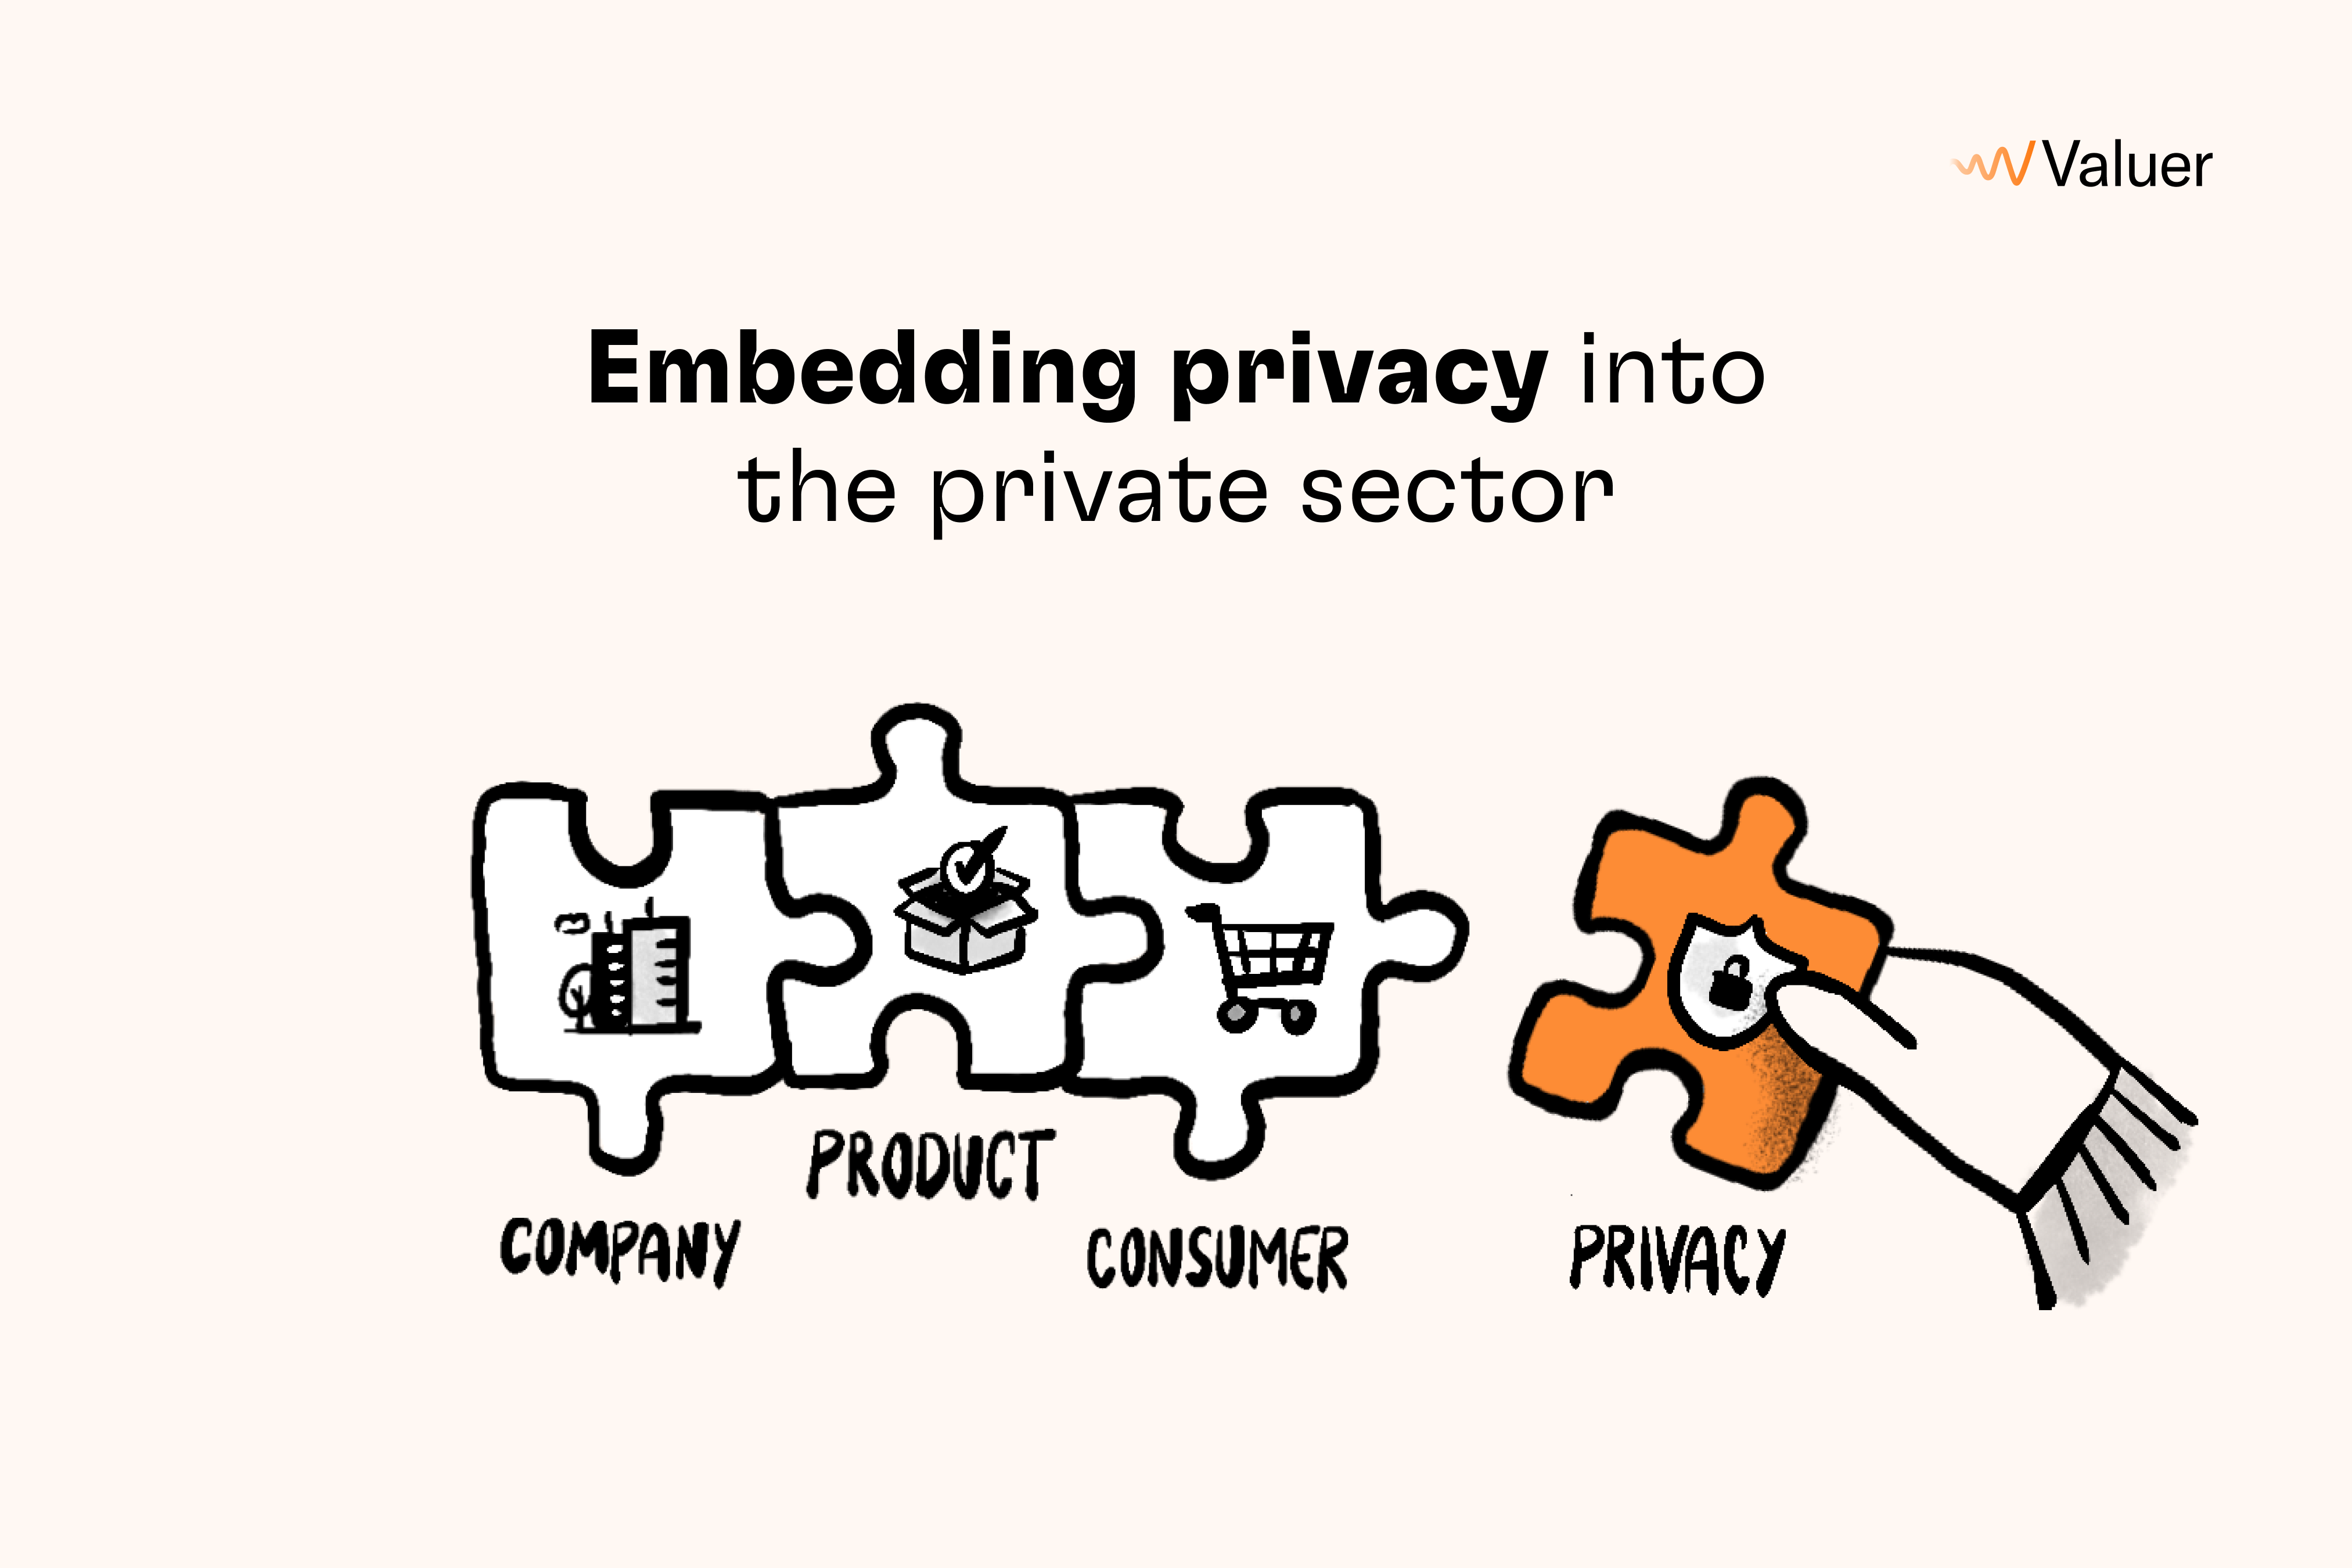 Embedding privacy into the private sector